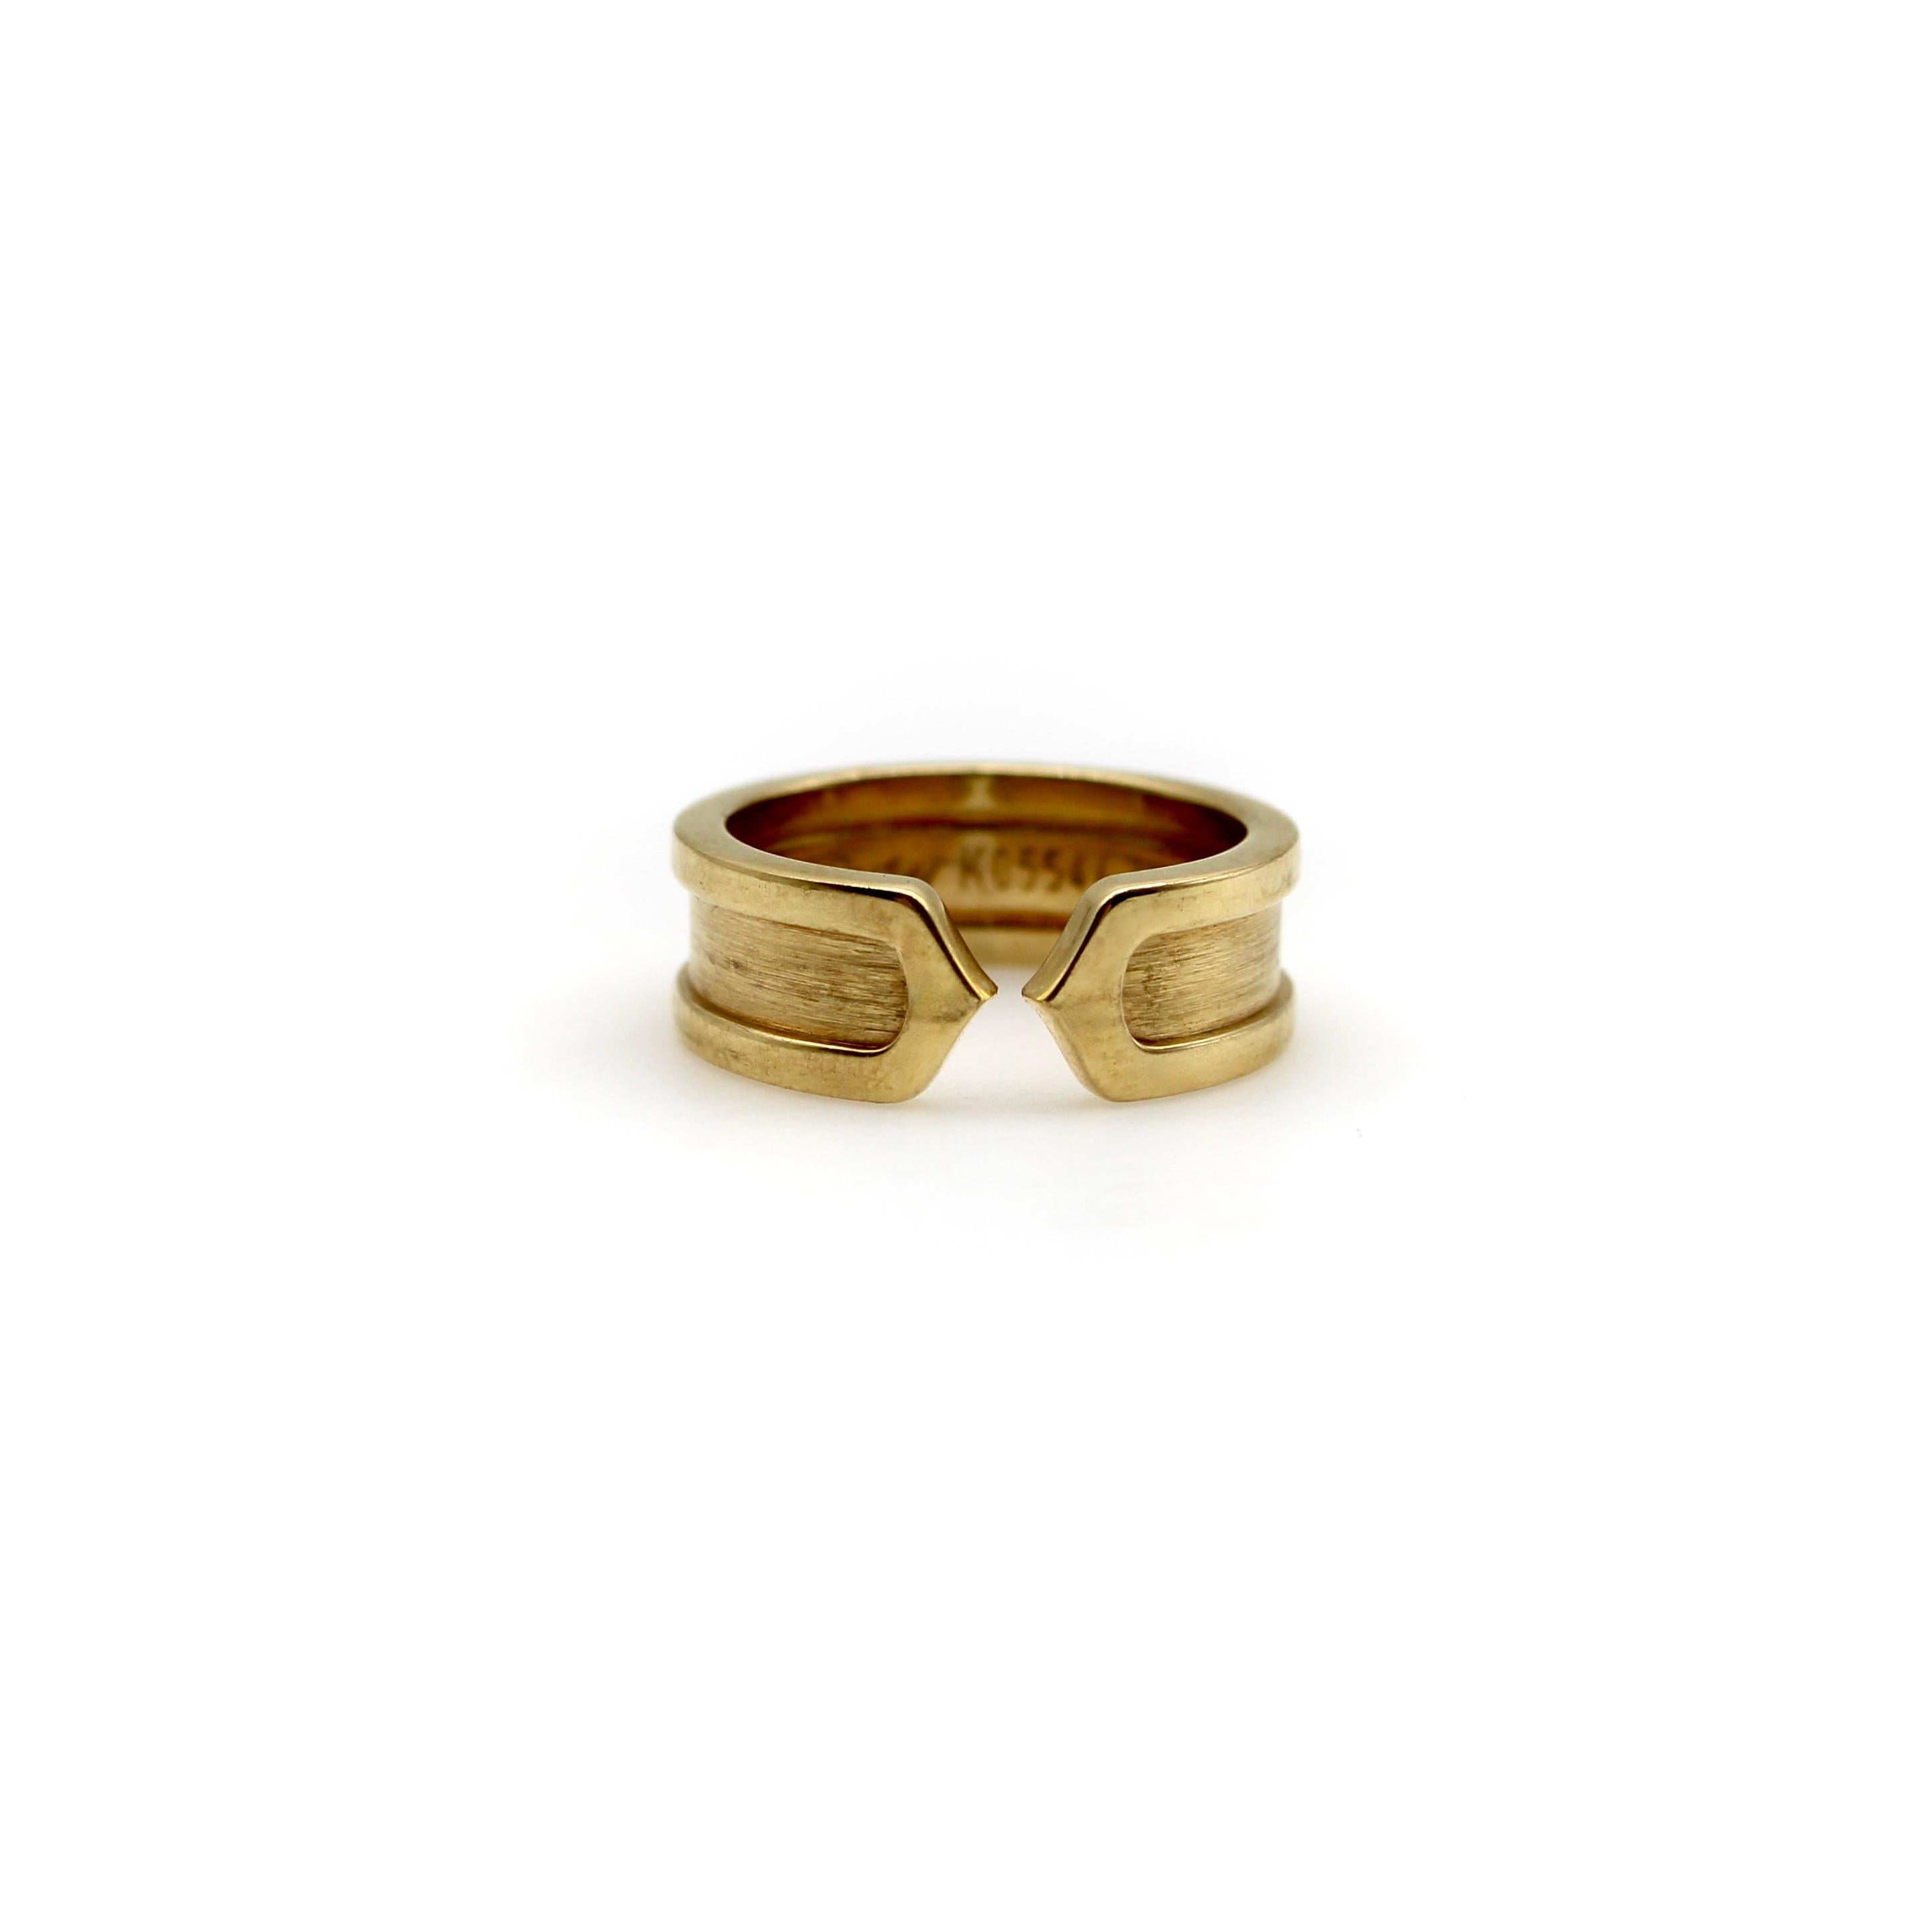 Vintage Cartier 18K Gold Double C Ring circa 2000 In Good Condition For Sale In Venice, CA